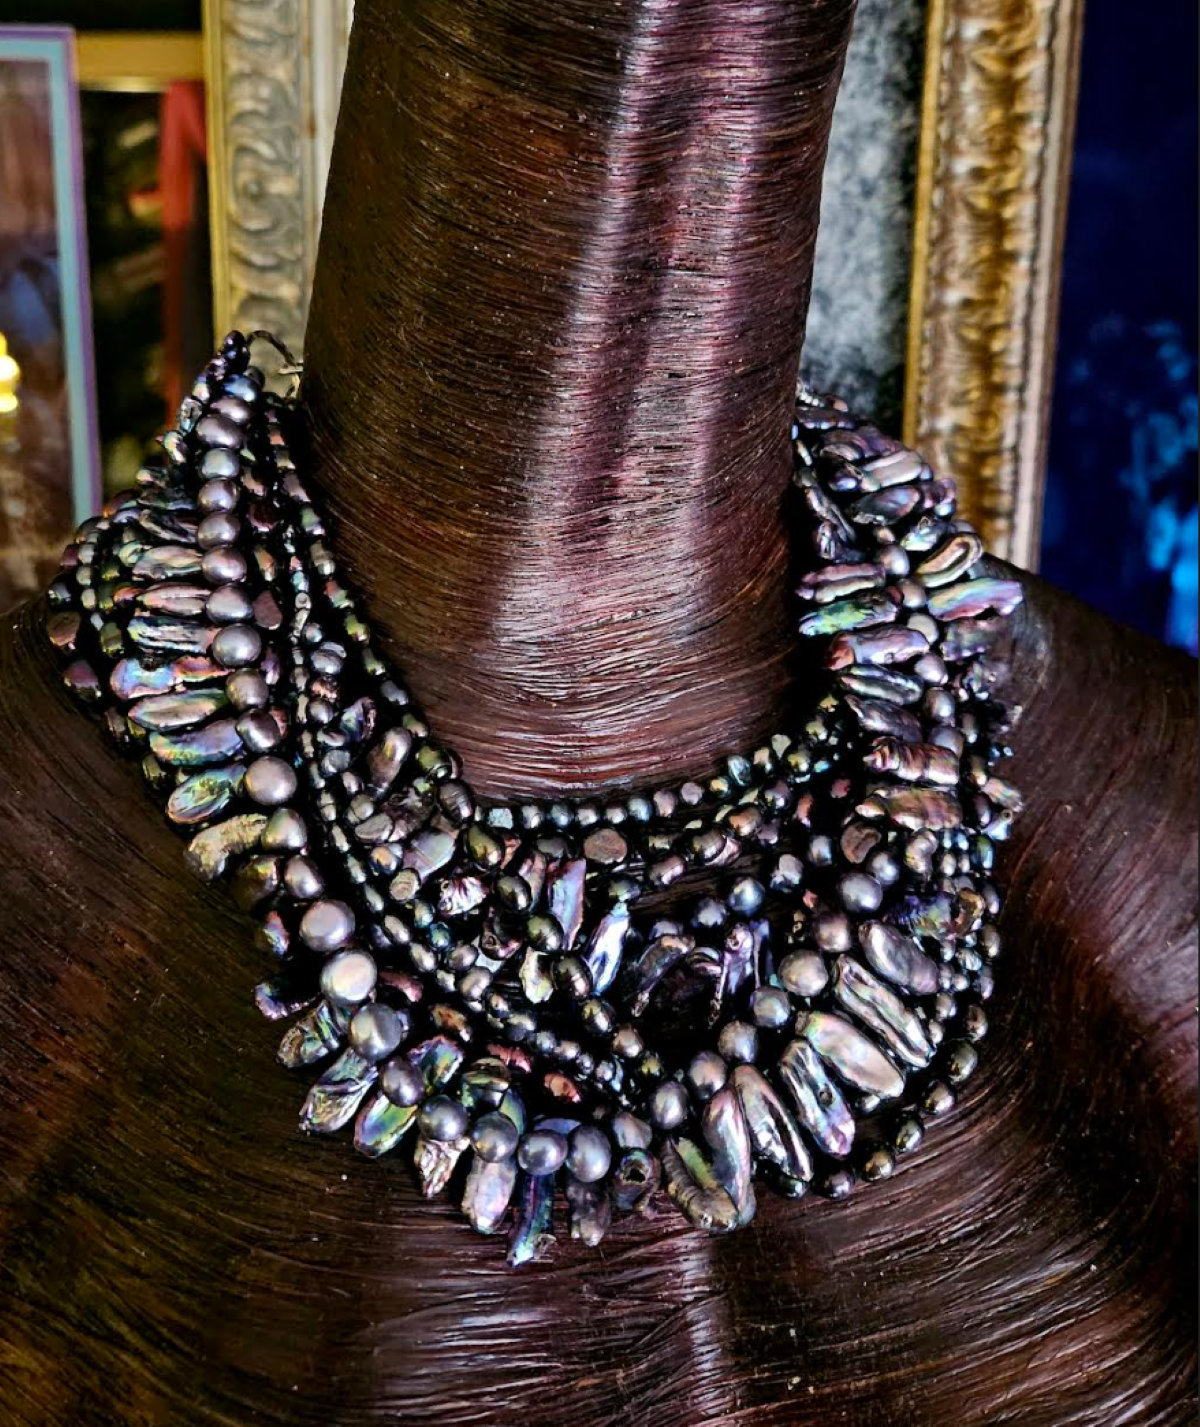 Black Peacock Cultured Freshwater Pearl Multi Strand Socialite Statement Necklace, Conservative Business Professional Venue Neck Candy, Dramatic Shell Choker